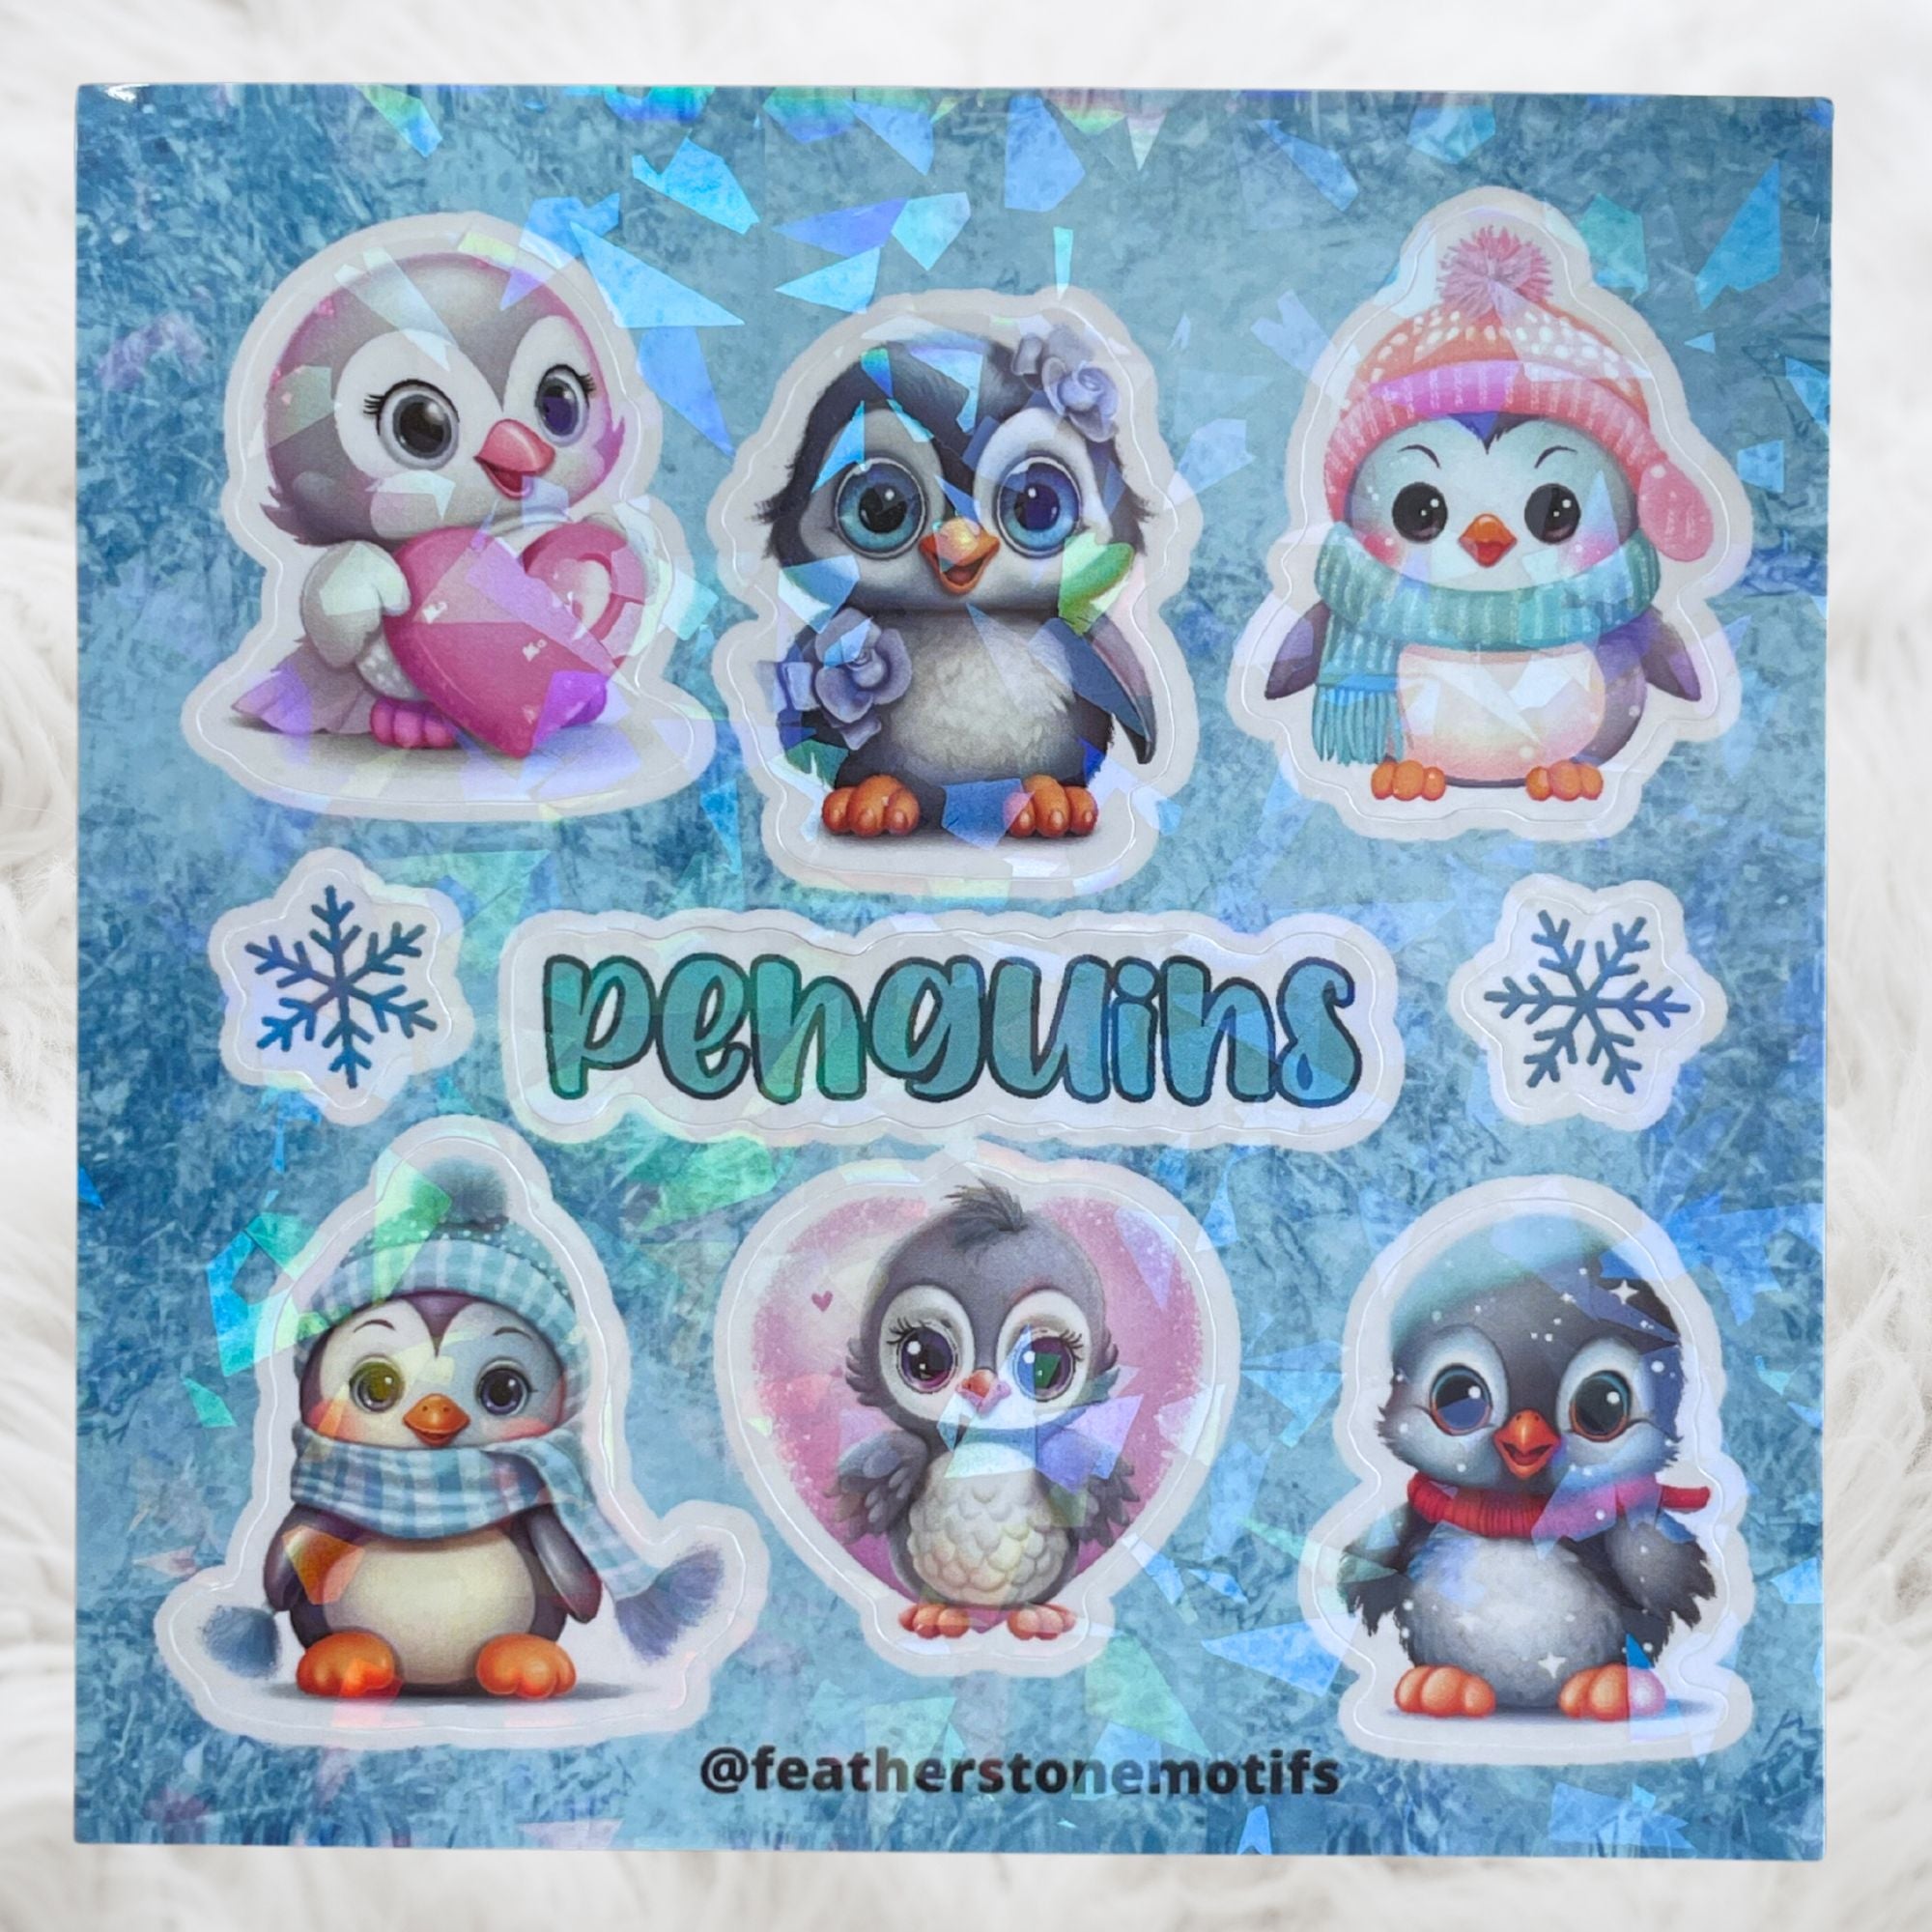 This image shows the Penguins mini sheet with holographic crackle overlay